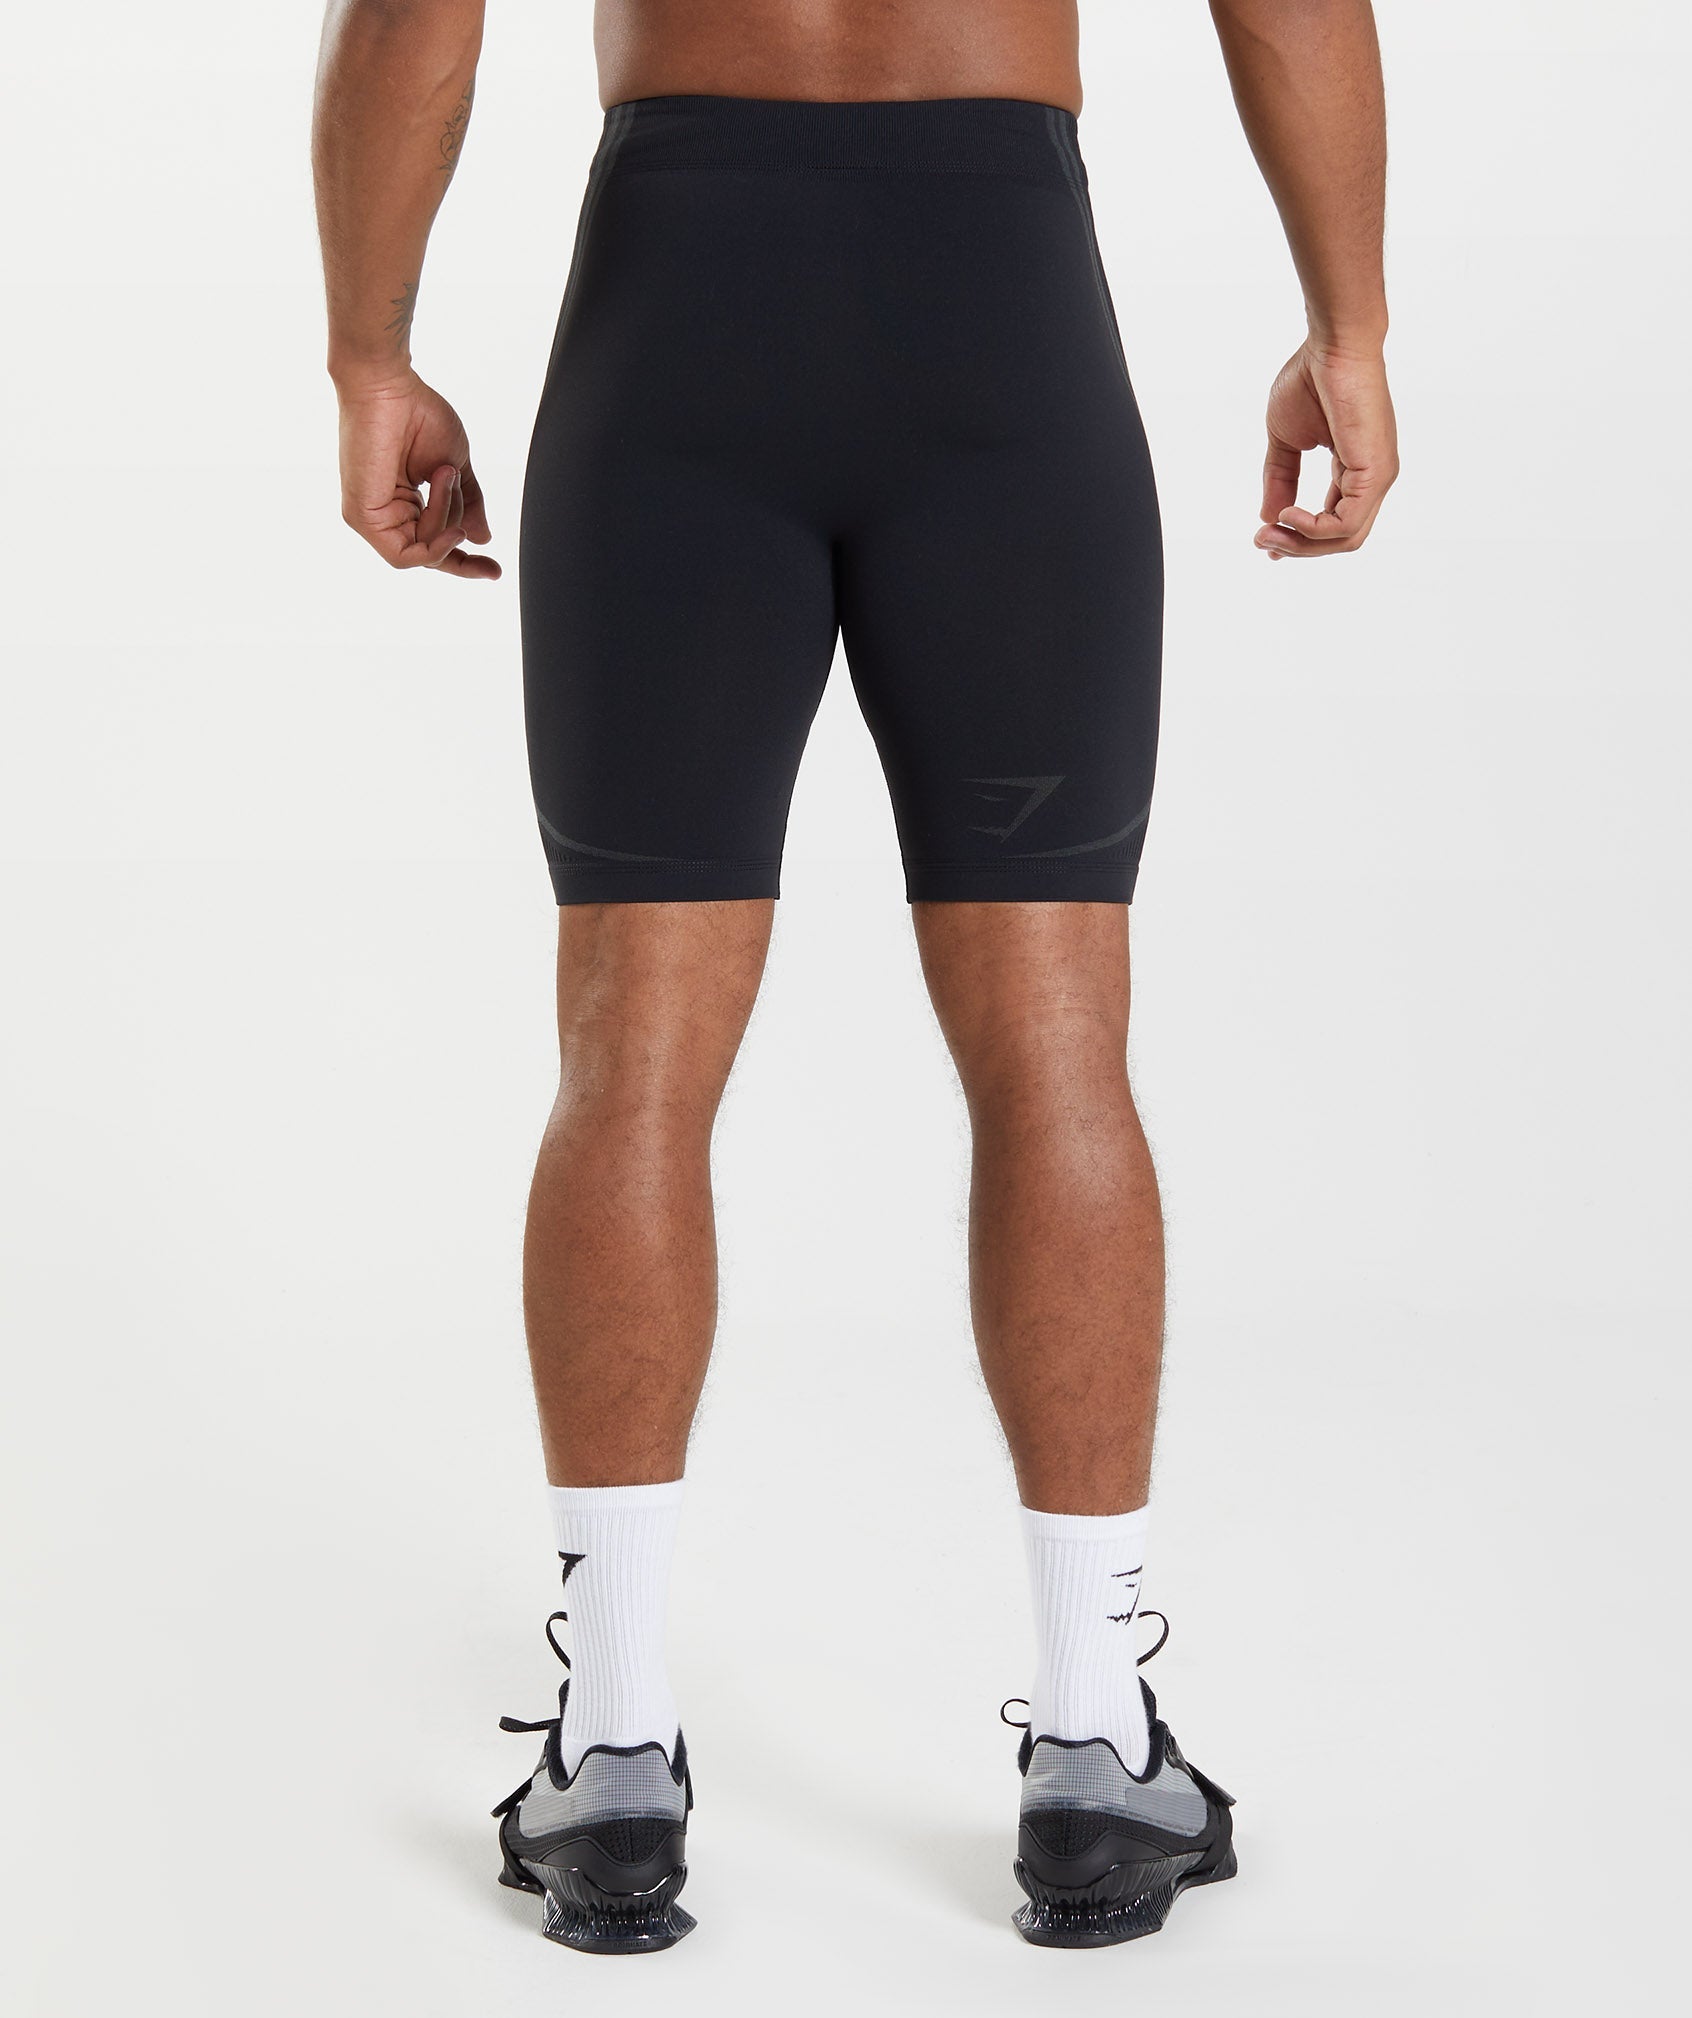 315 Seamless 1/2 Shorts in Black/Charcoal Grey - view 4